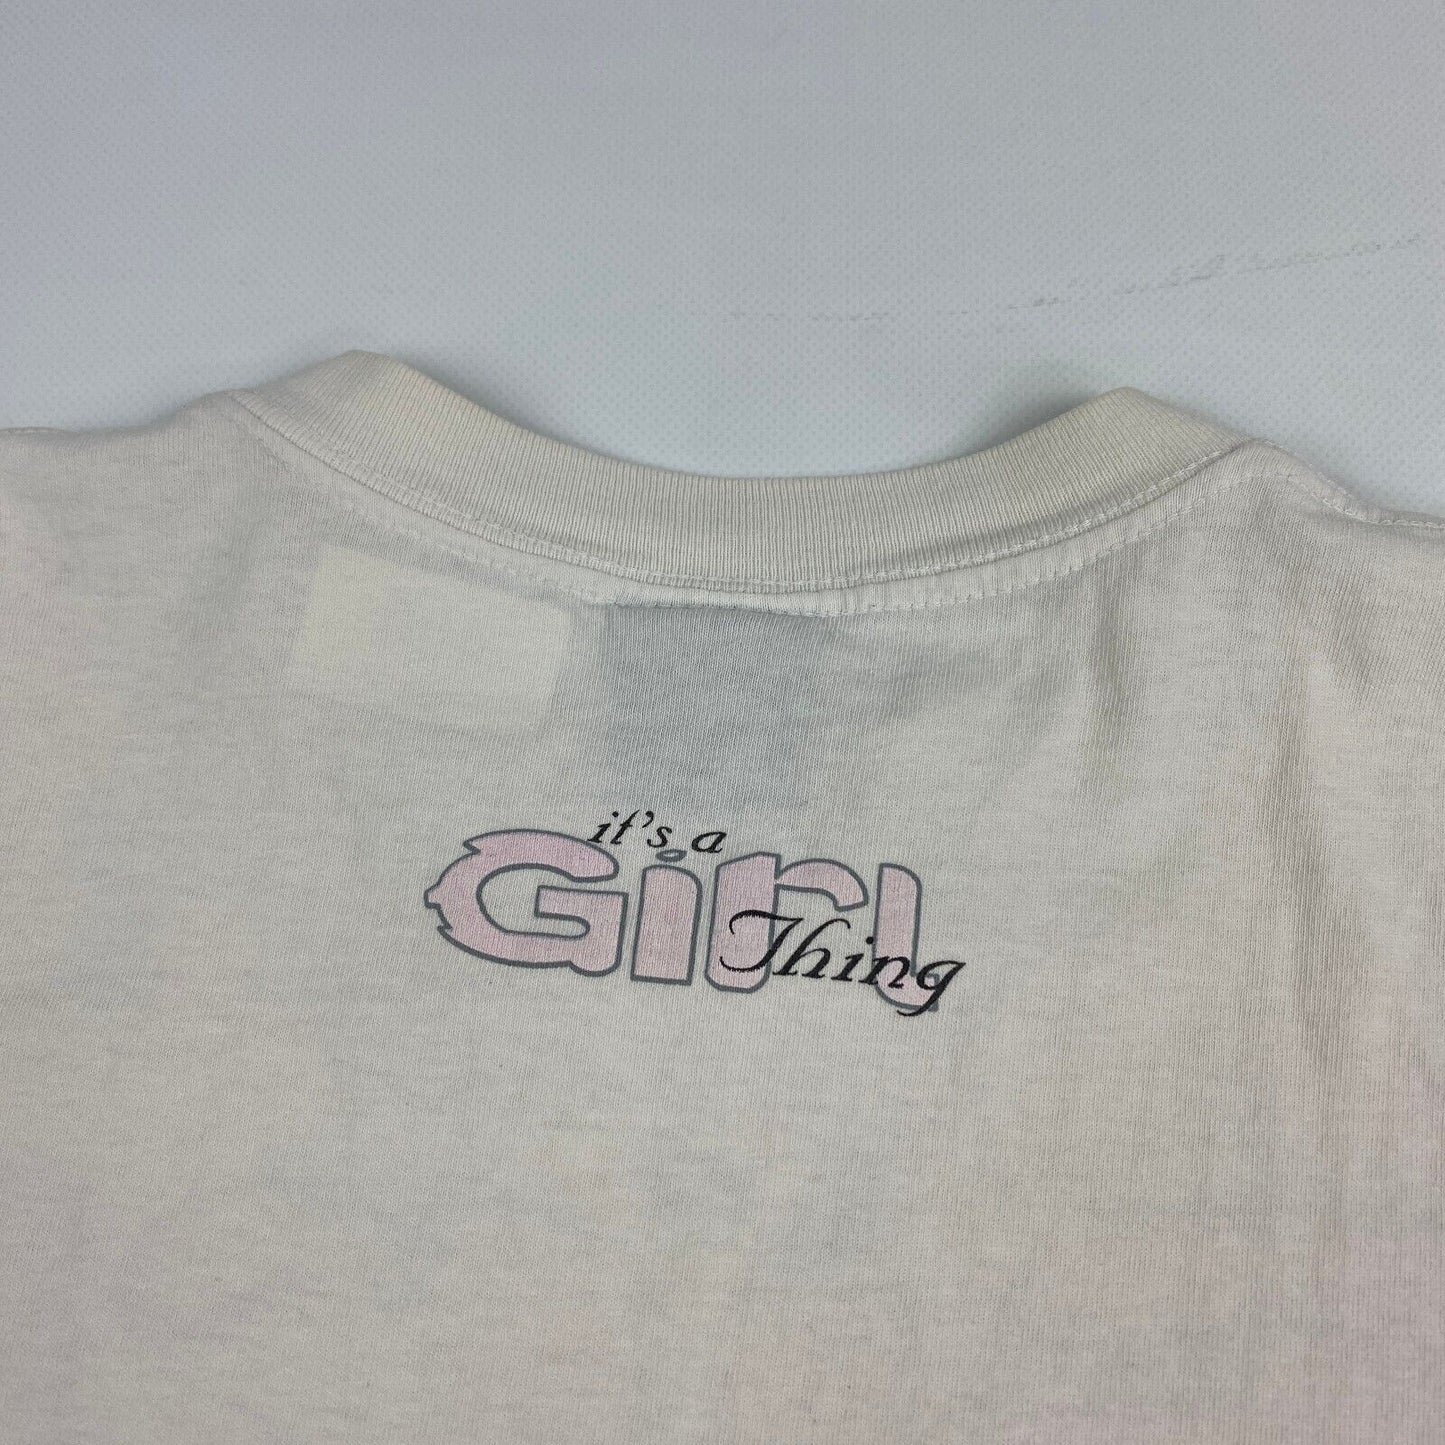 VINTAGE 90s Its A Girl Thing Big Graphic White T-Shirt sz Large Men